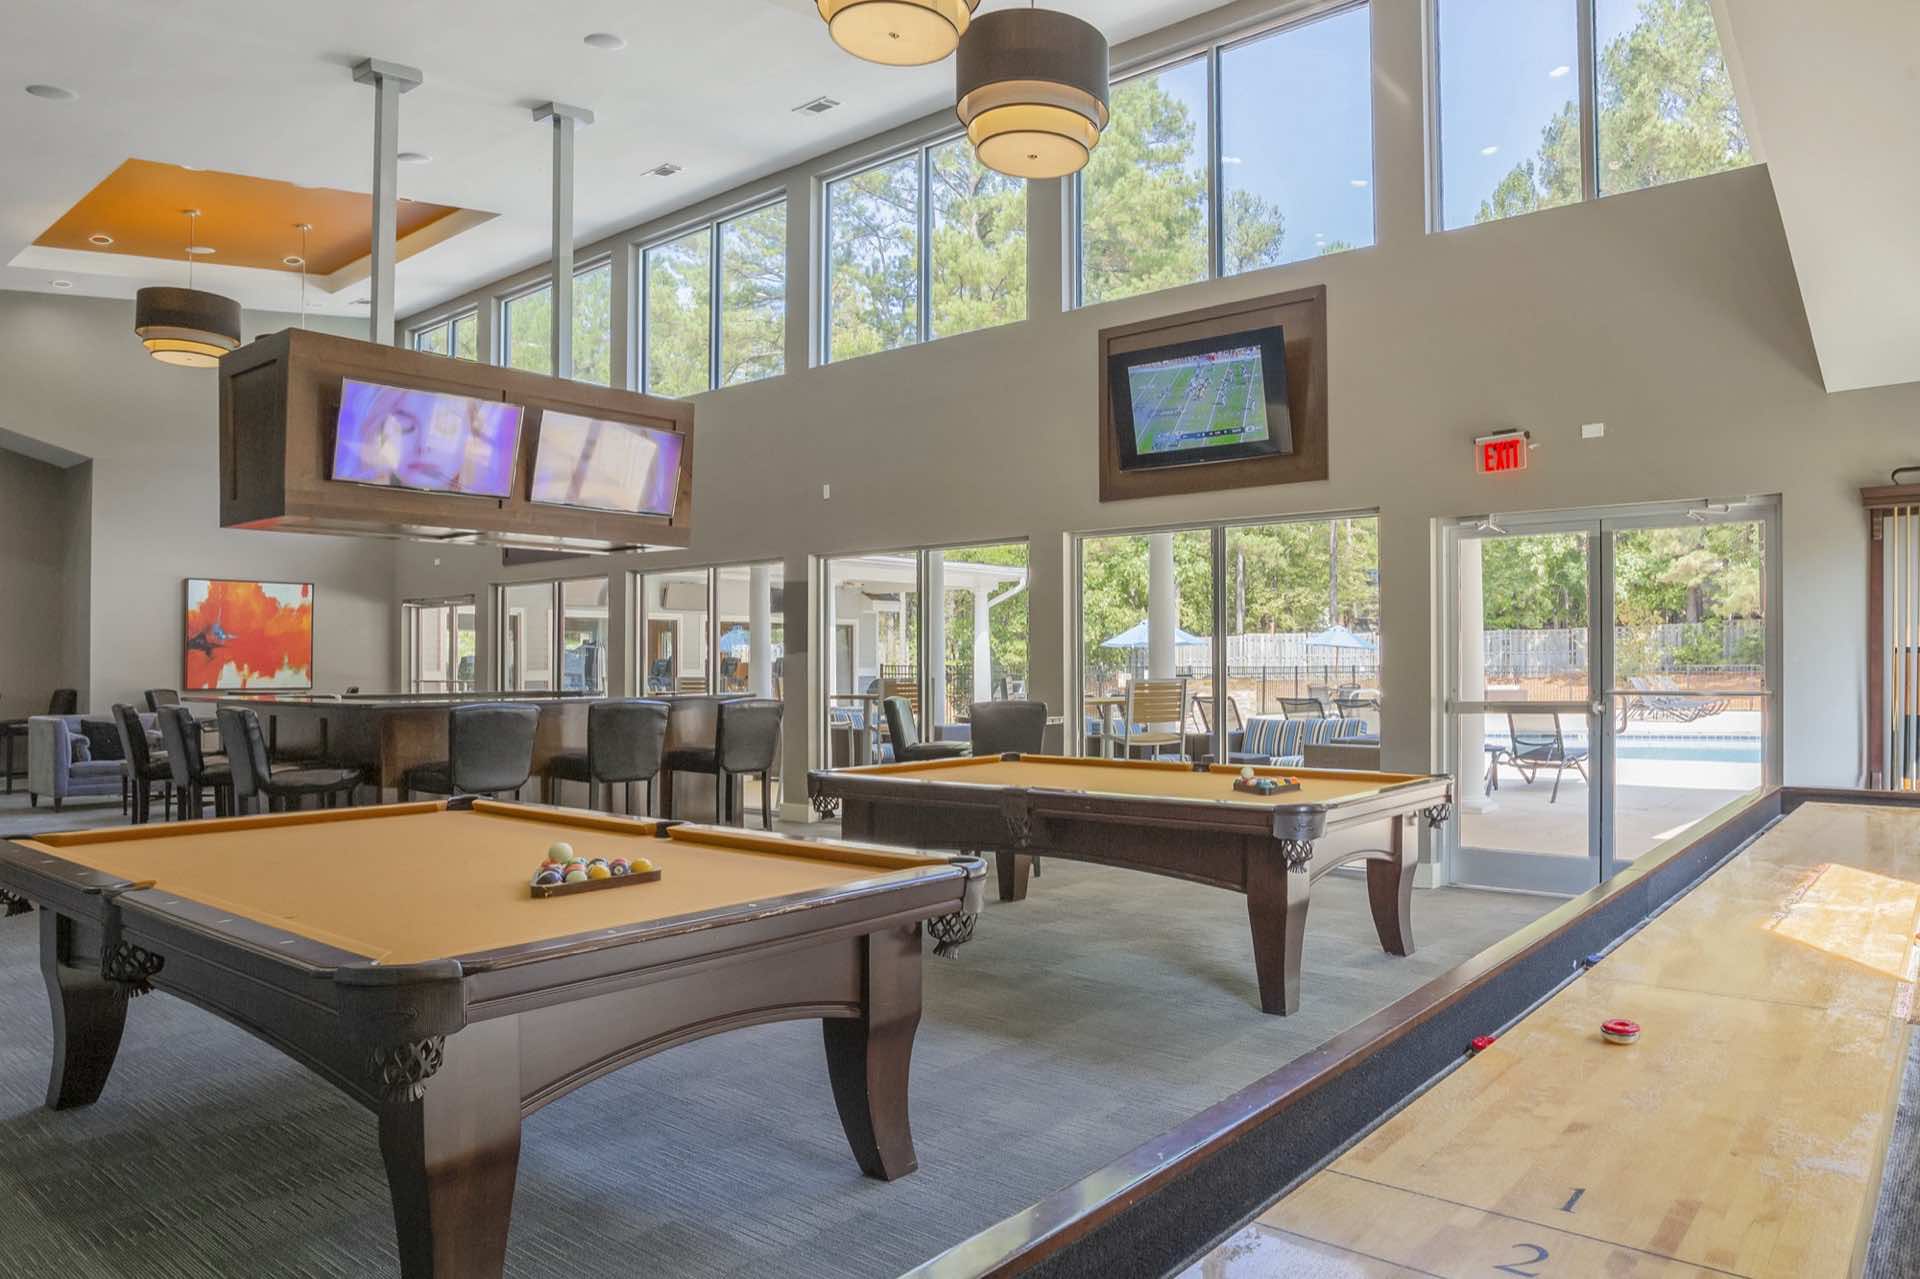 pool tables, shuffleboard and tvs